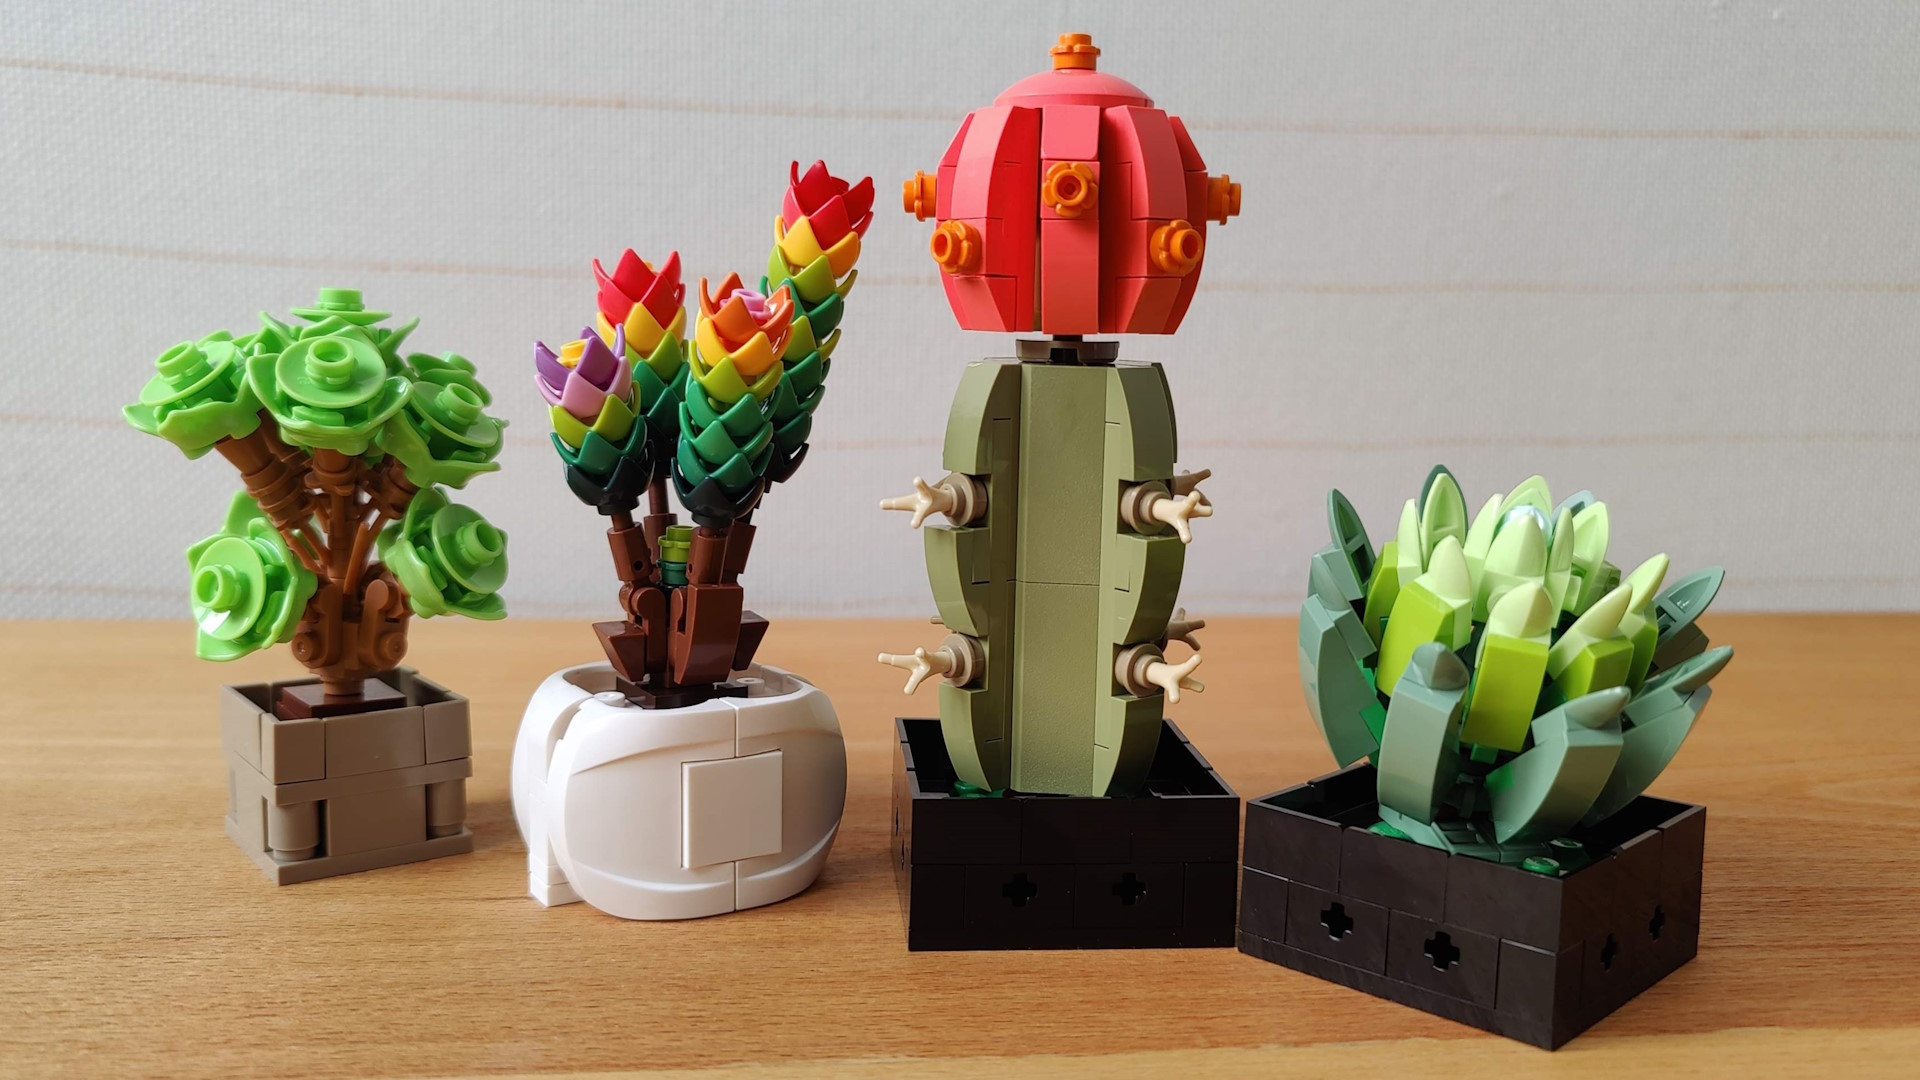 Lego Botanical too expensive? Check out these cheap Lego flower alternatives